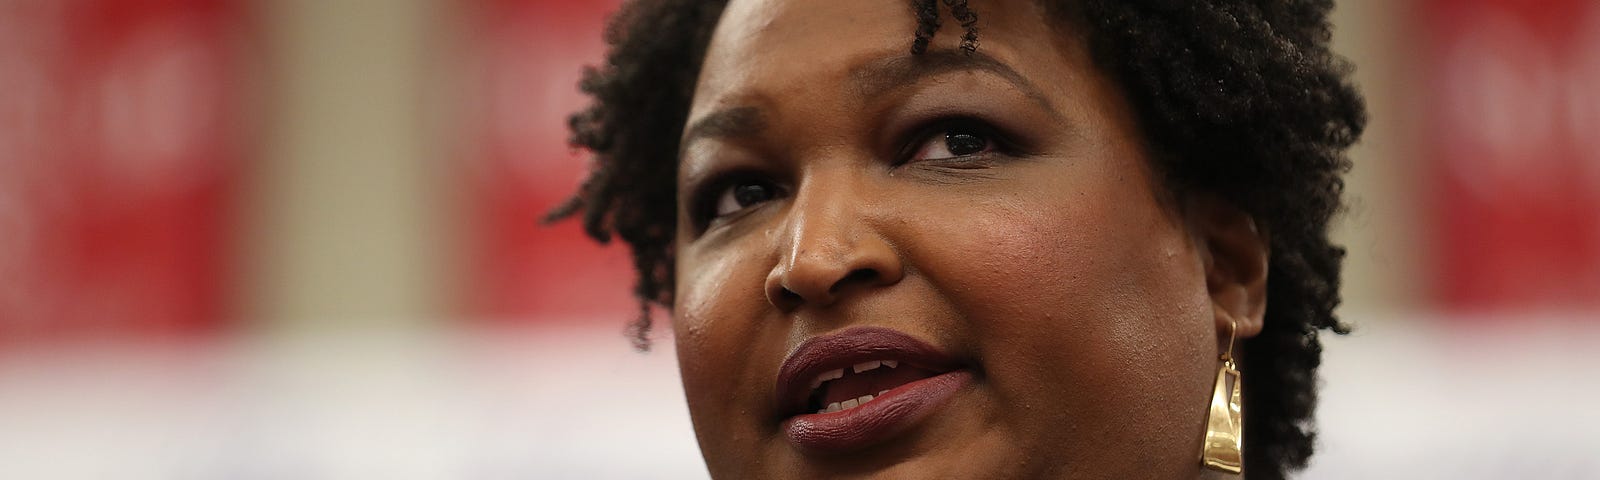 A closeup photo of Stacey Abrams speaking at an event.